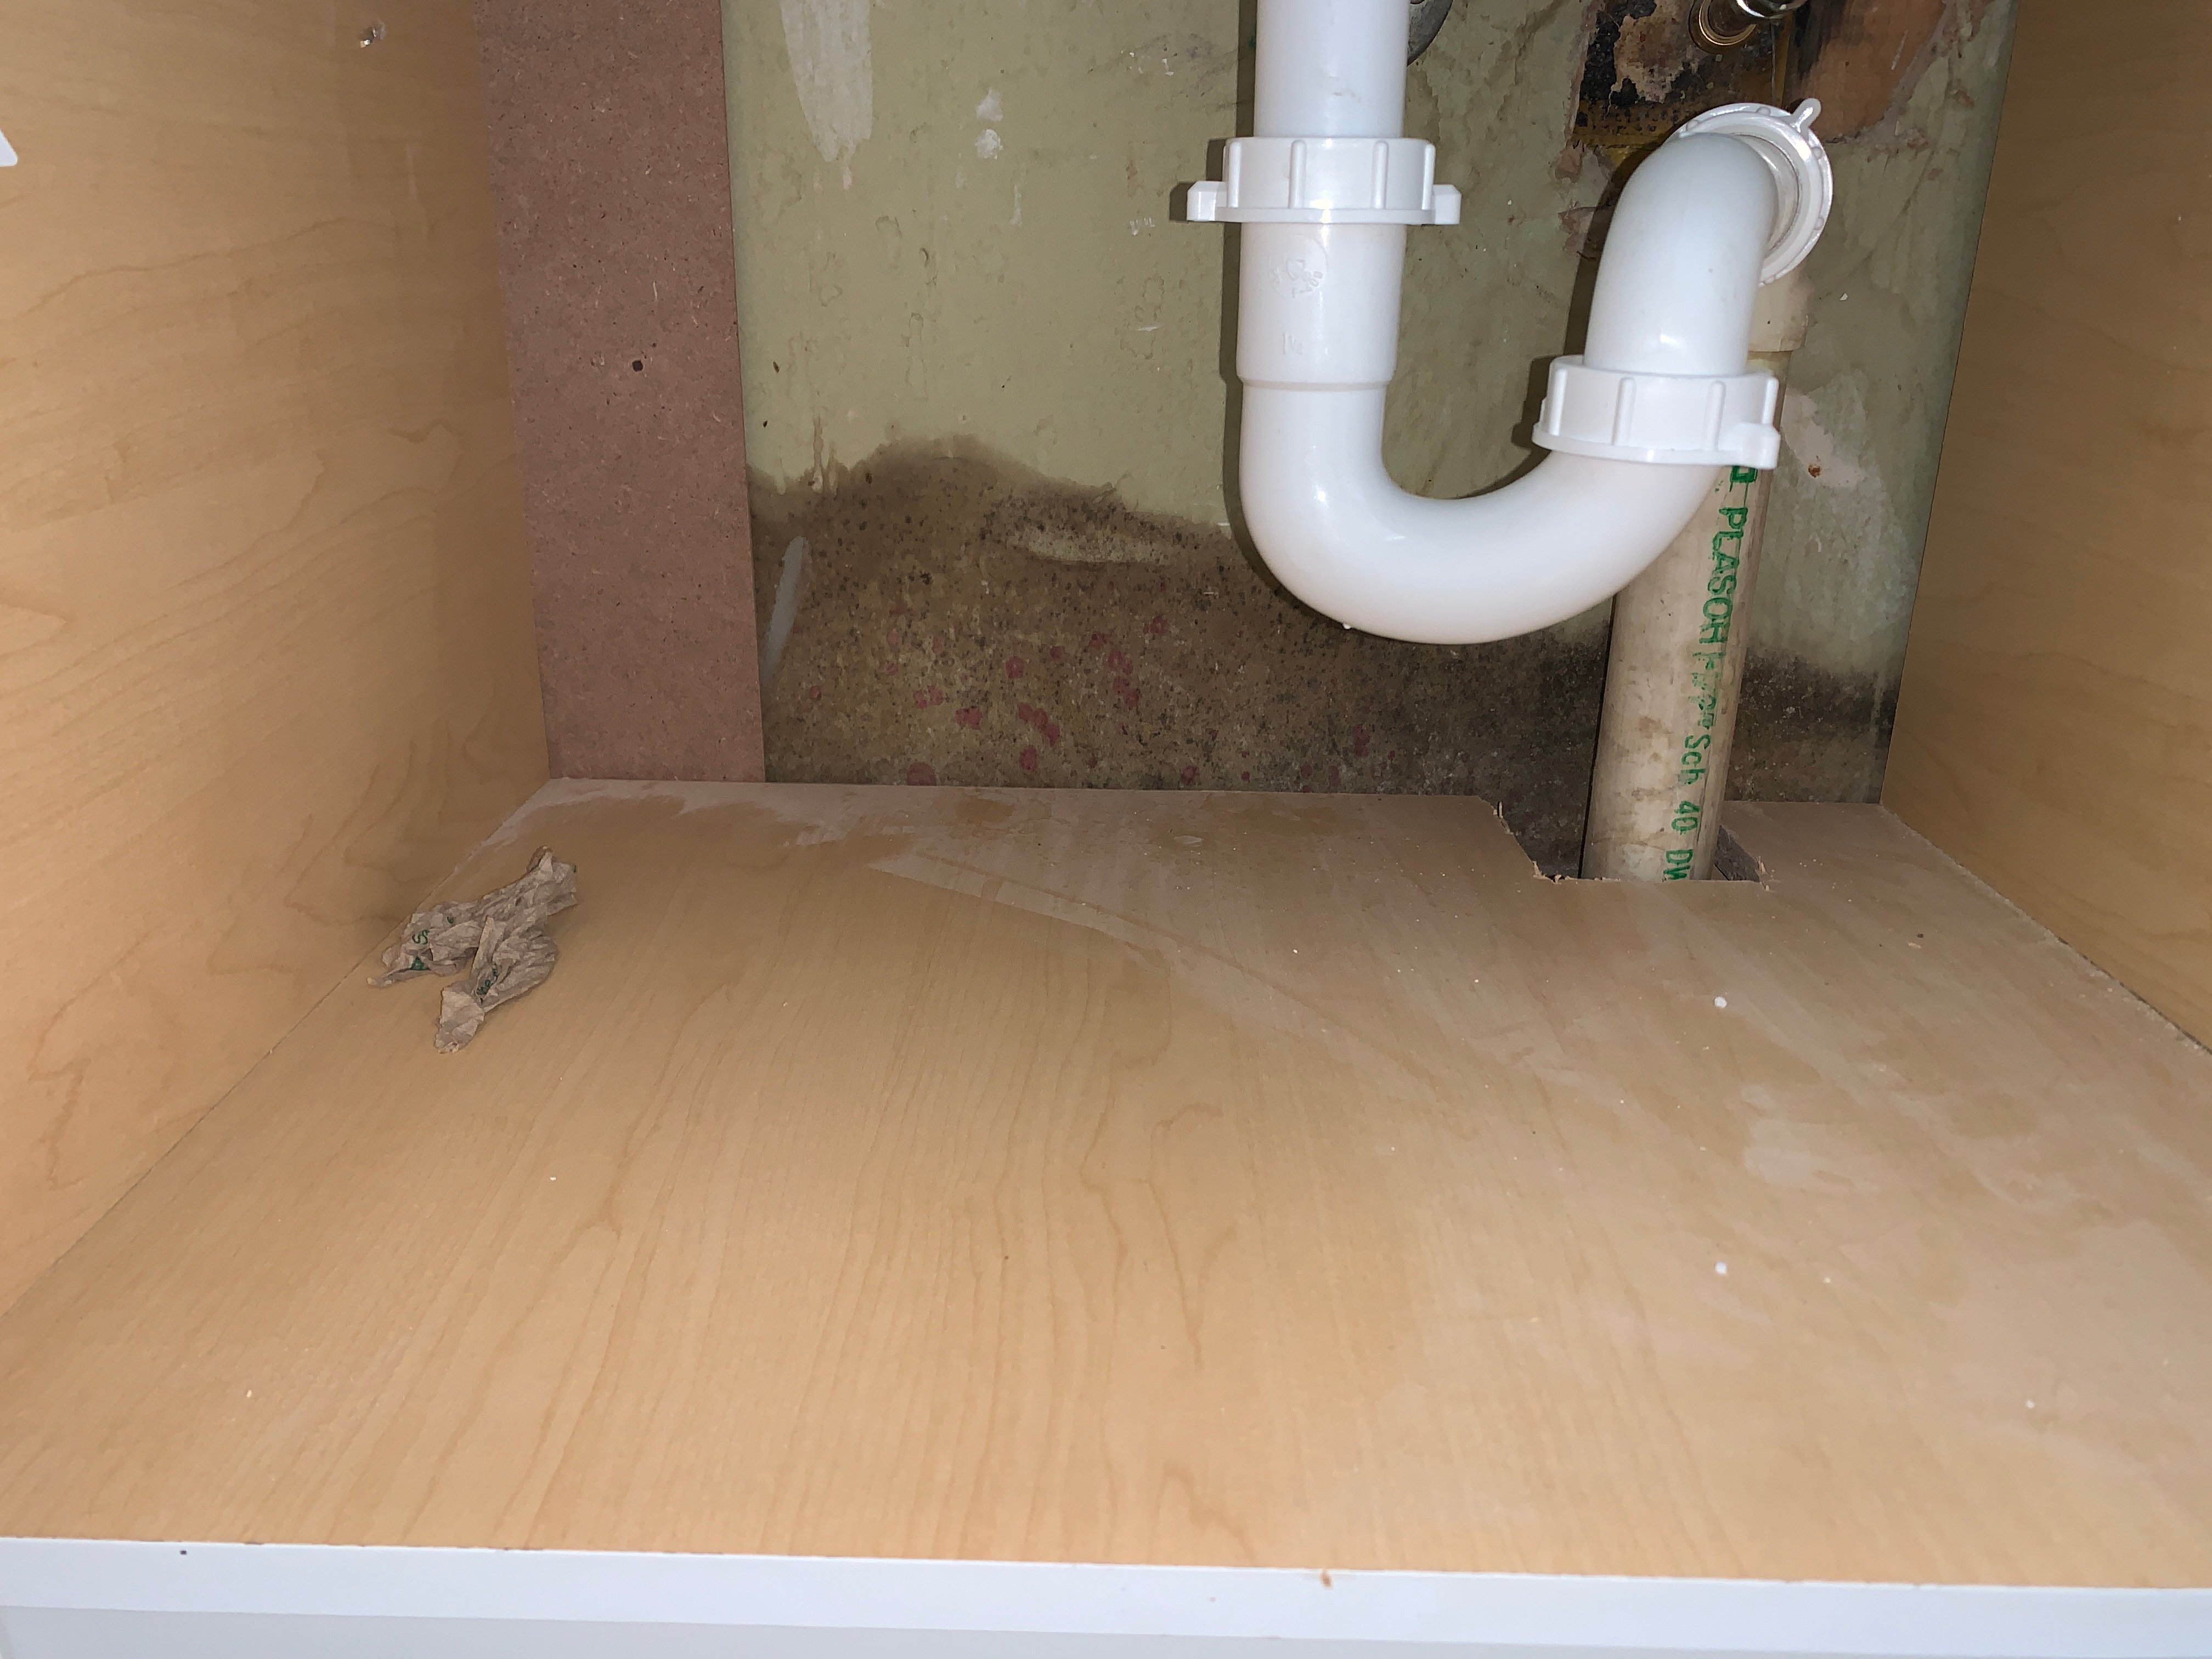 is a mold inspection worth it?